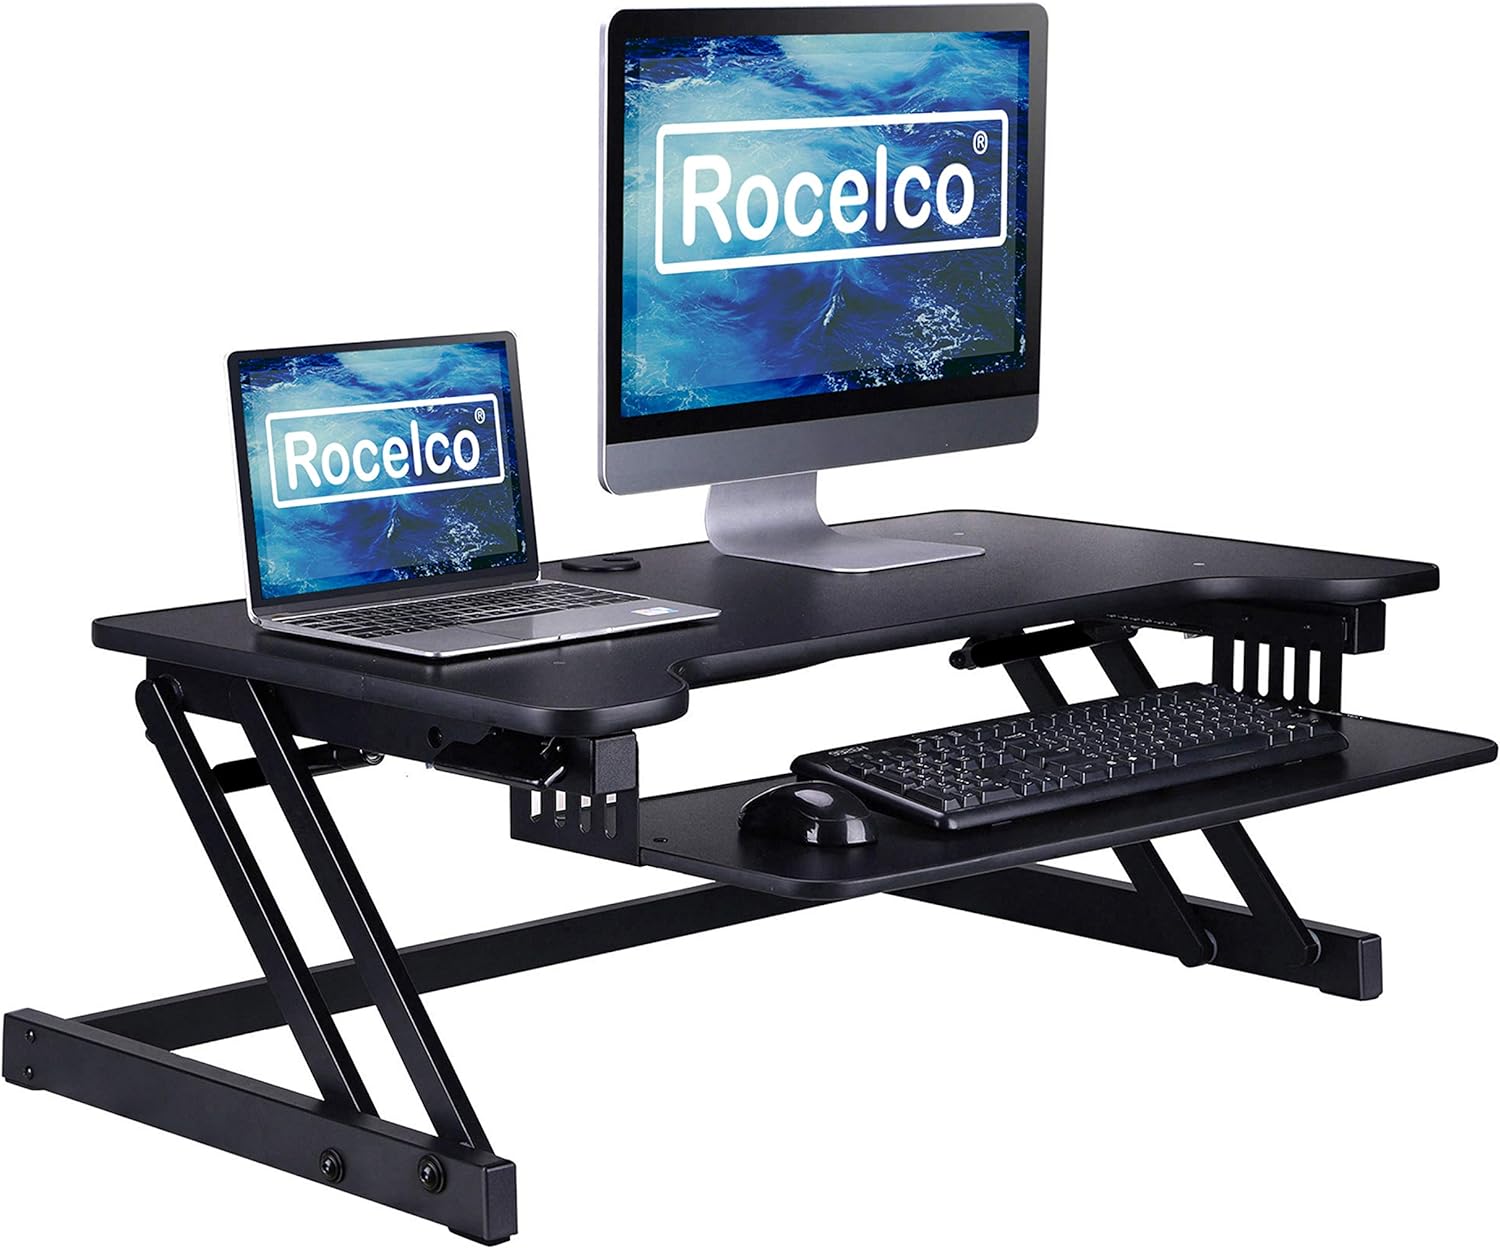 What I like most about the Rocelco 32 is how smoothly it moves and up and down loaded with expensive electronic devices sitting safely on top.The brake is located under the front right corner of the its desktop. You release the brake with the palm of your right hand on top of the deck and your fingers wrapped around resting on the brake handle. To release the brake, pull up on its handle. To engage the brake, release the handle. Brake On is its default position or the position it is always in 